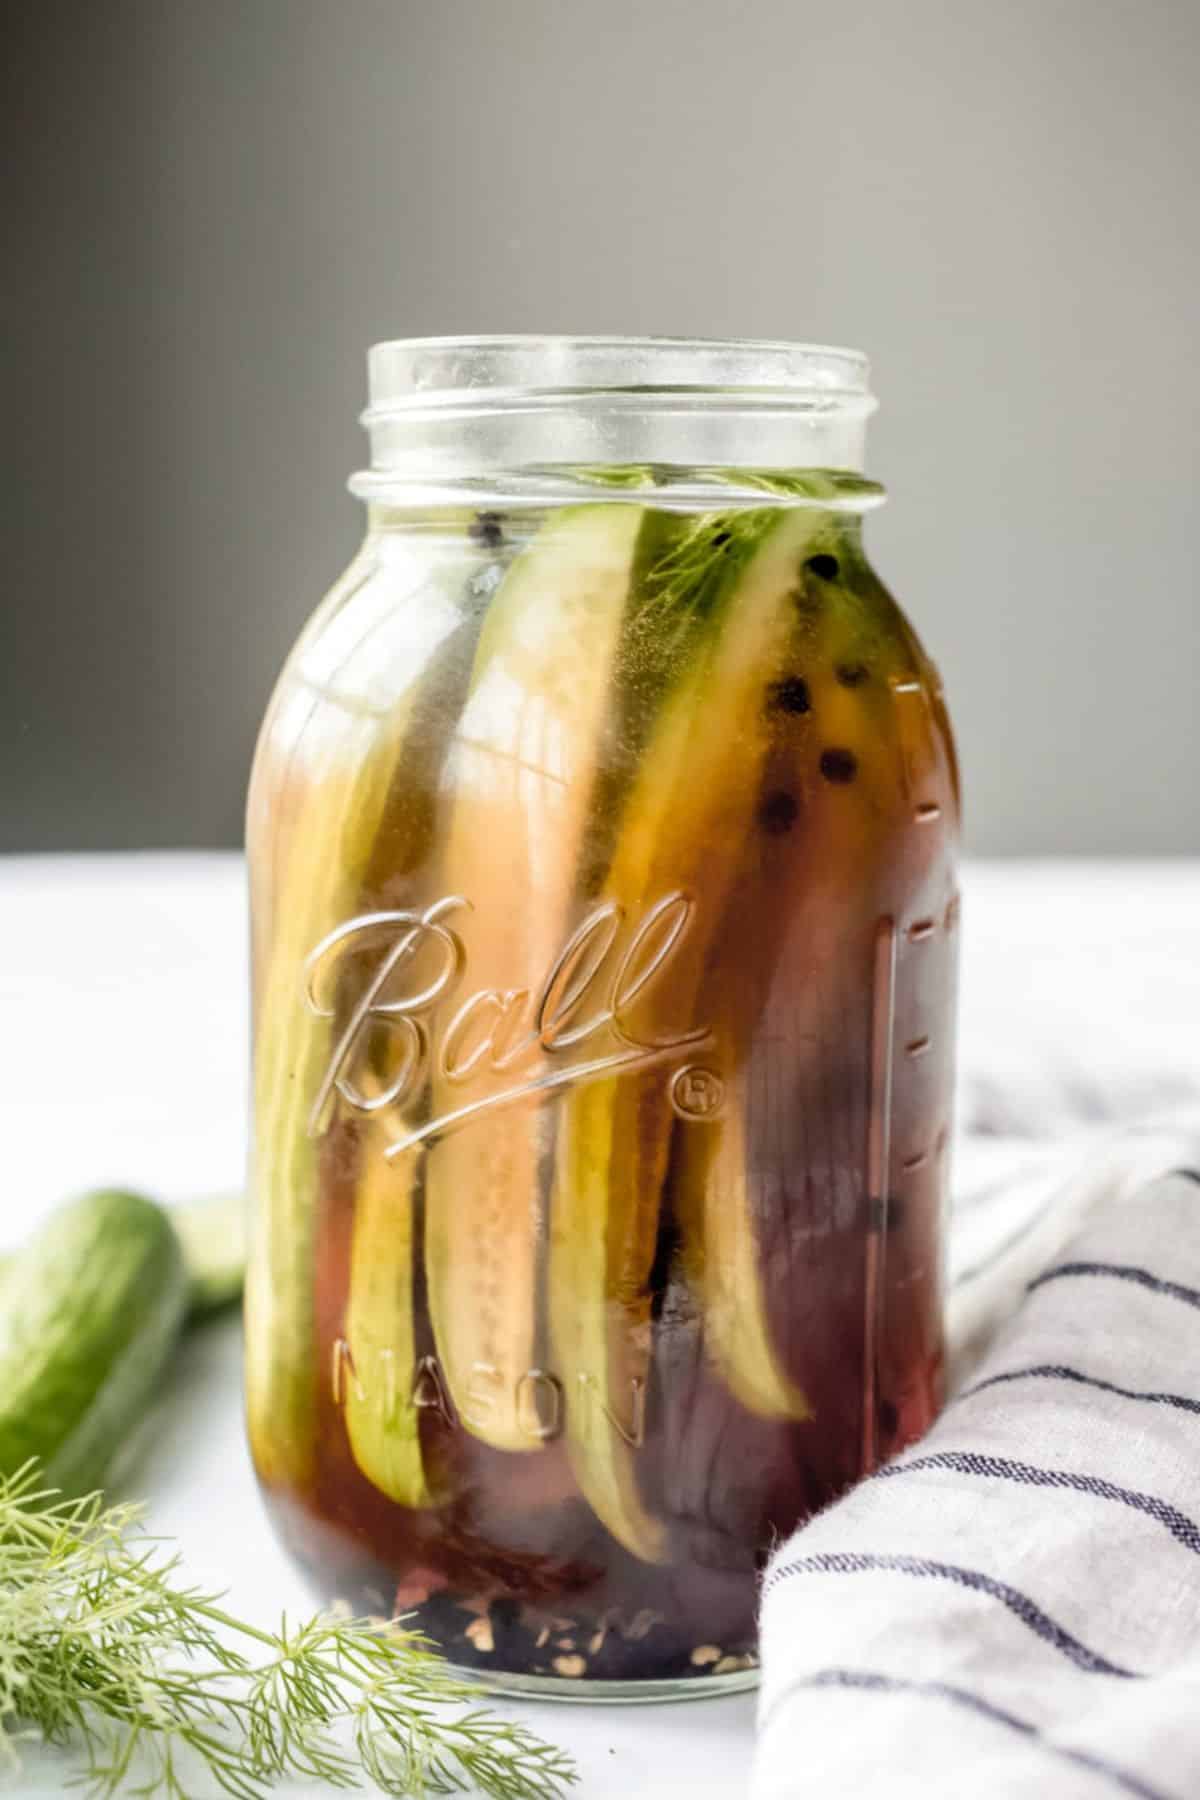 Spicy beer pickles in a glass jar.